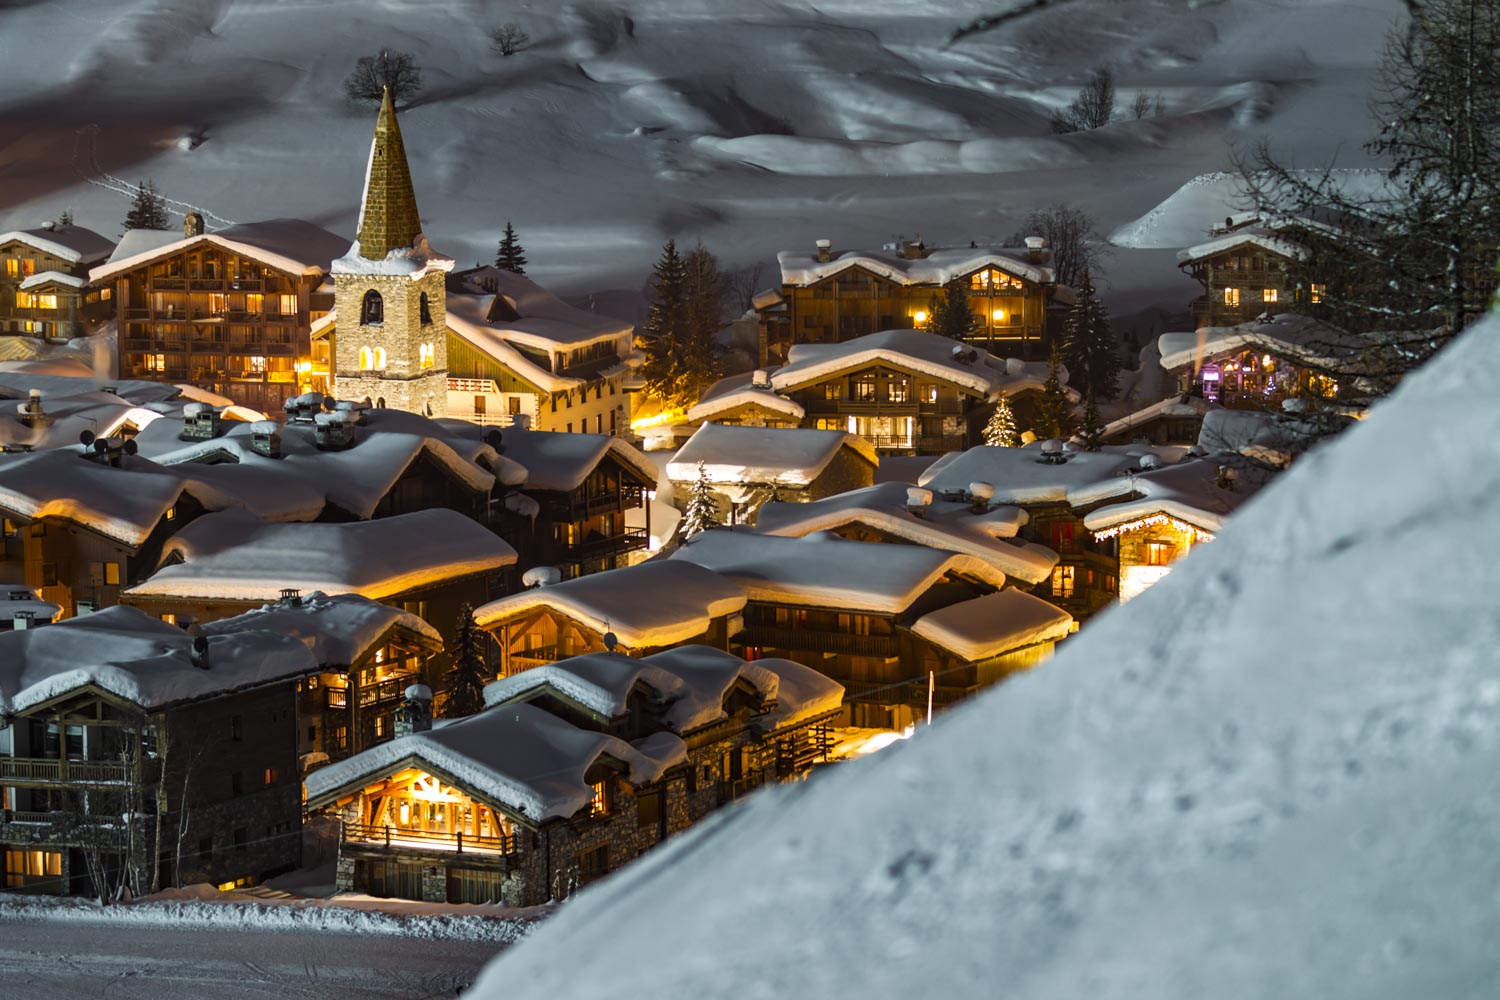 The Village of Val d'Isère by Night - Val d'Isère in the Snow